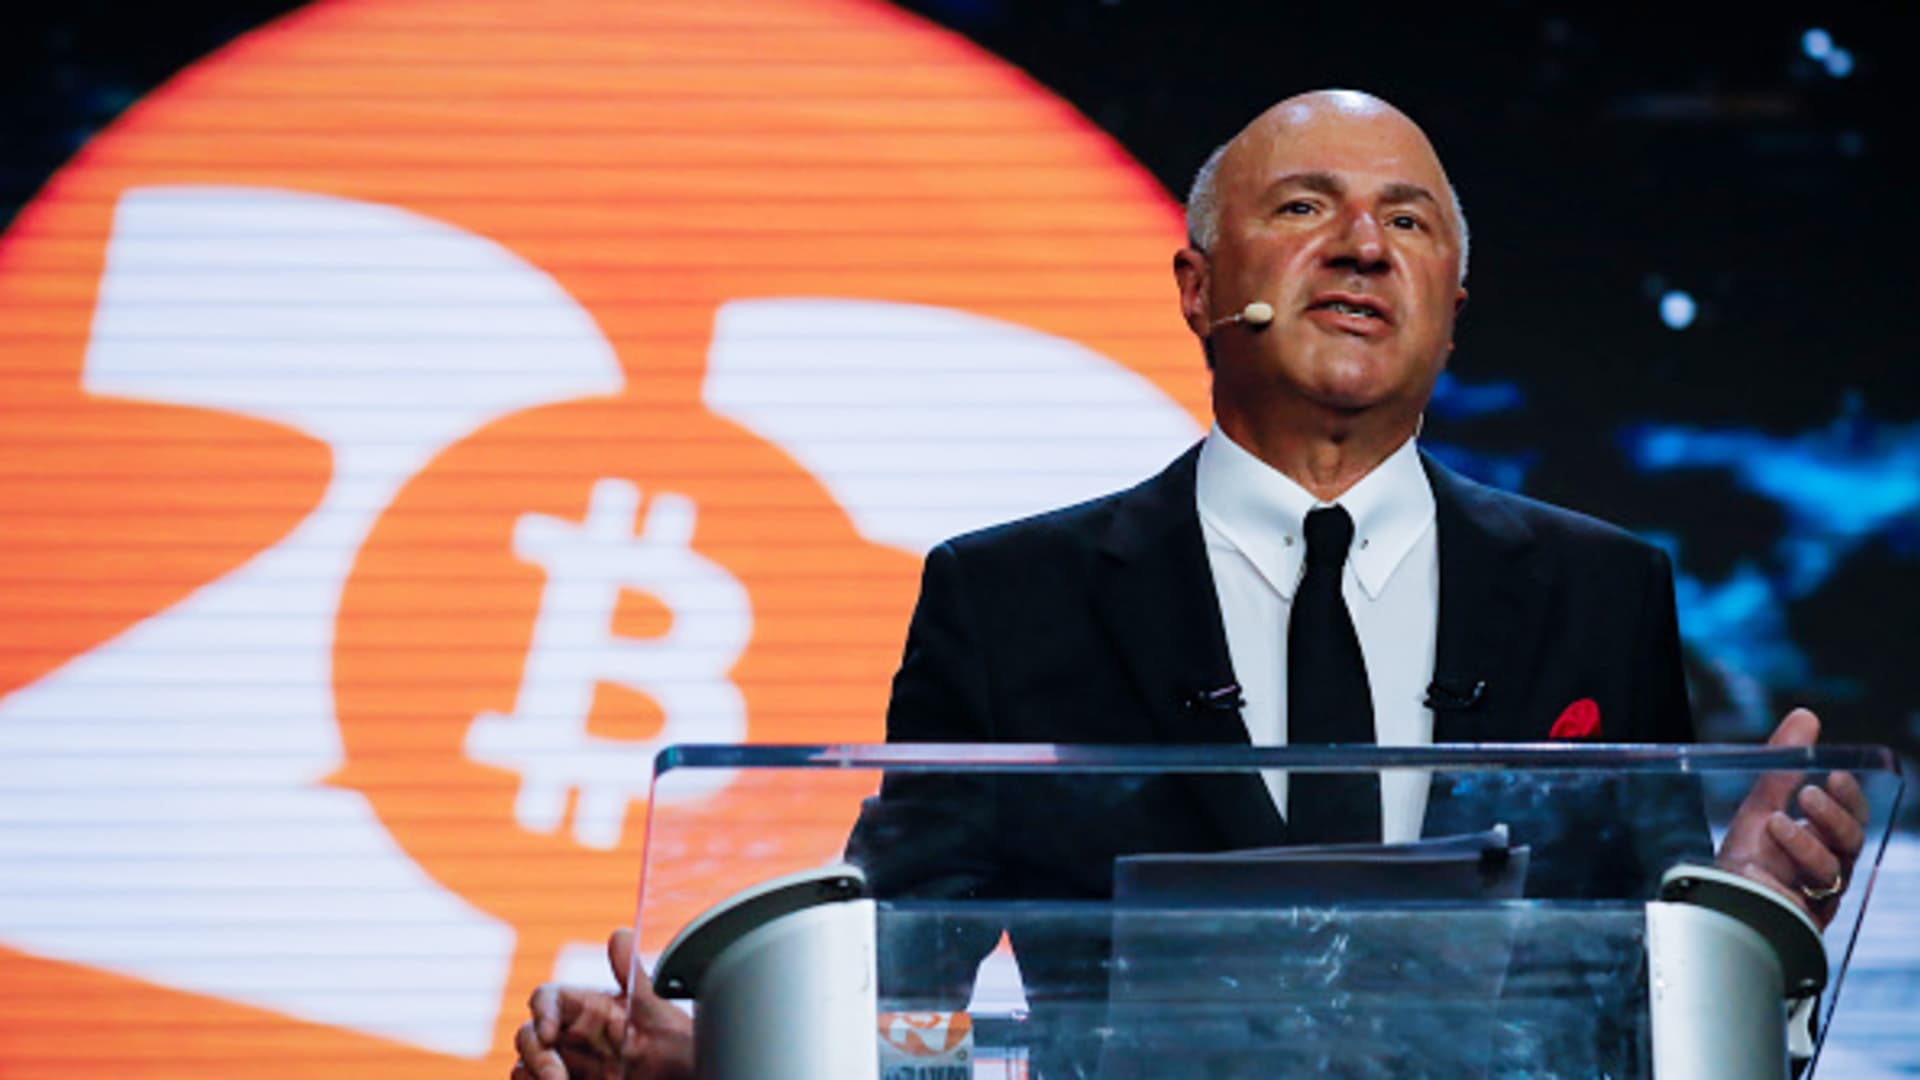 FTX spokesman Kevin O'Leary says he lost $15 million crypto payday